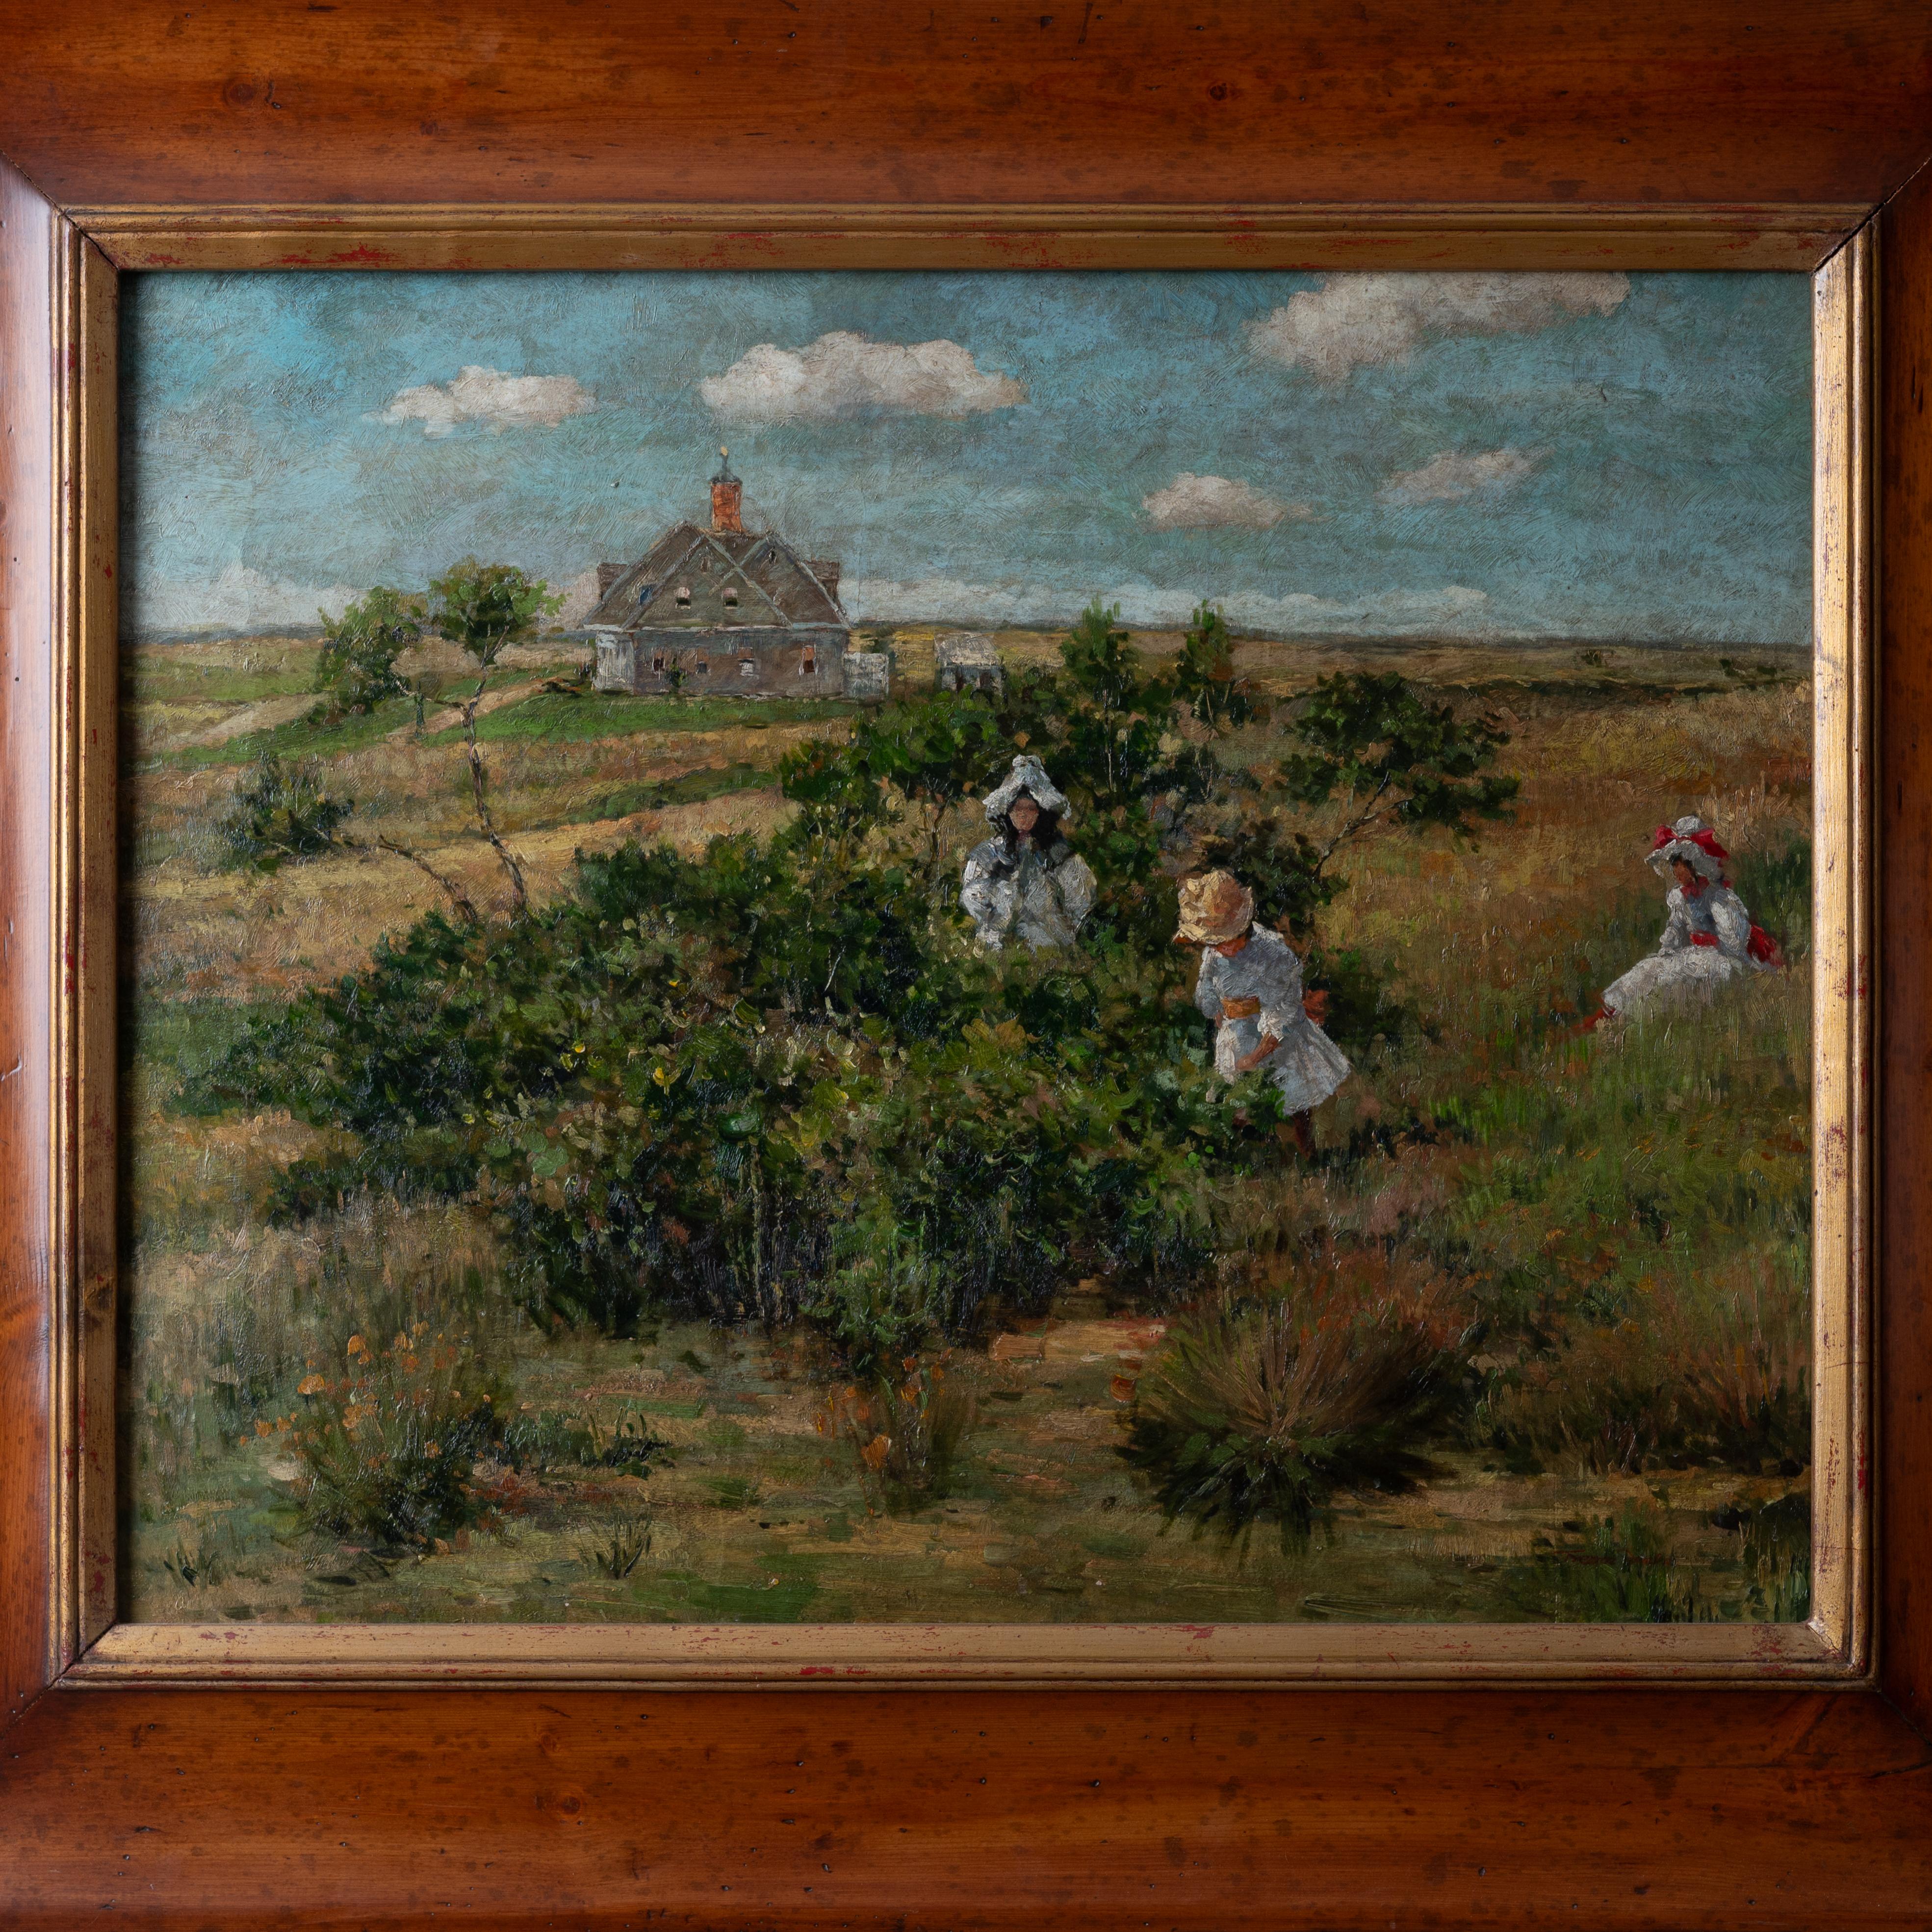 Hand-Painted Trevor James - Long Island Bayberry Bush Painting  For Sale